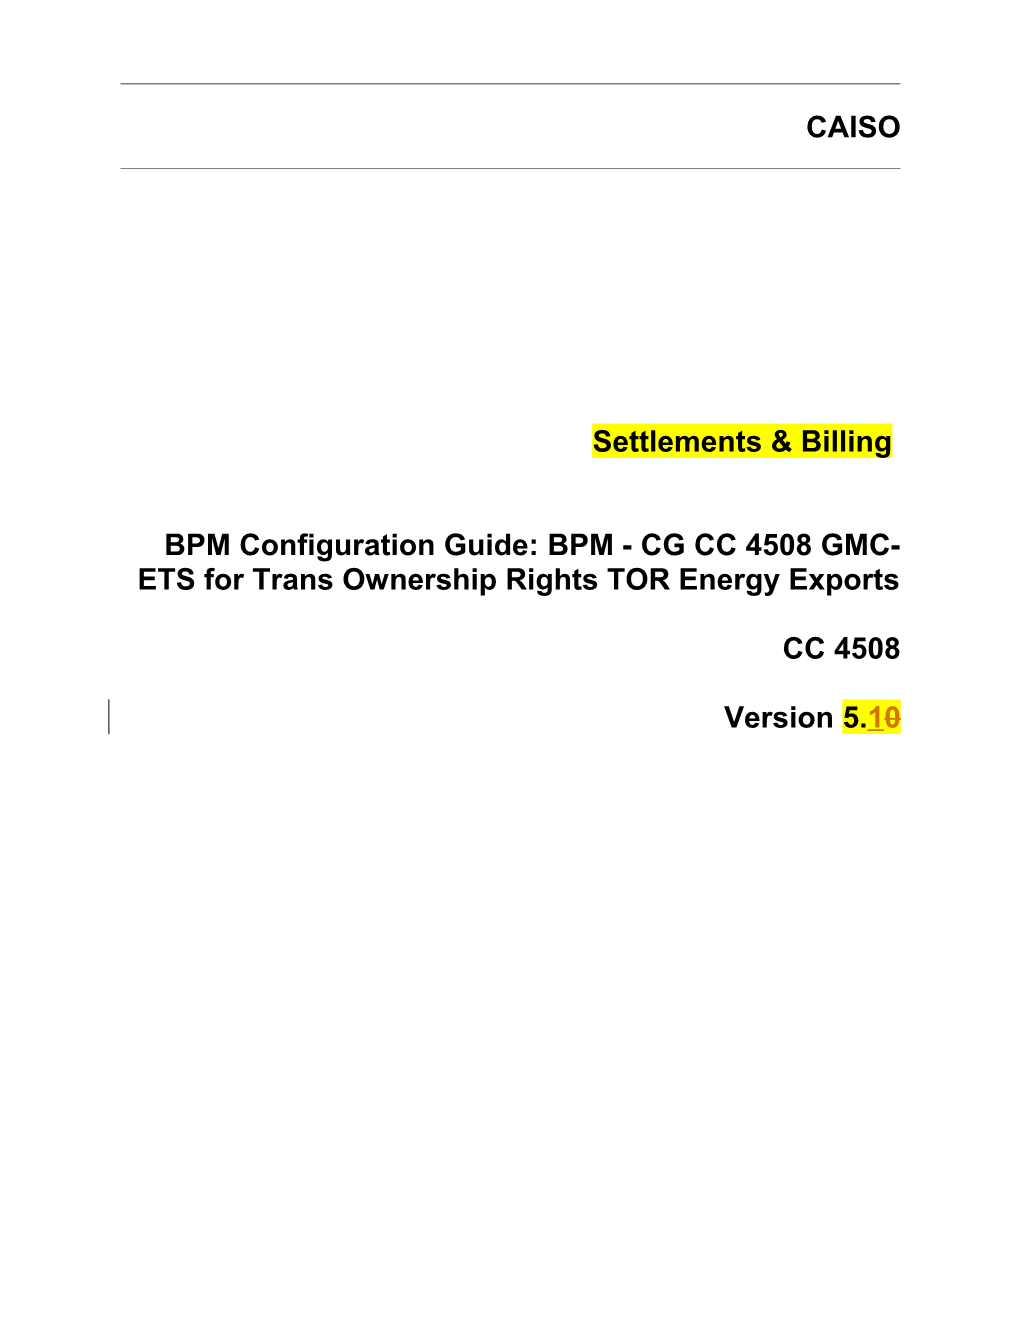 BPM - CG CC 4508 GMC-ETS for Trans Ownership Rights TOR Energy Exports